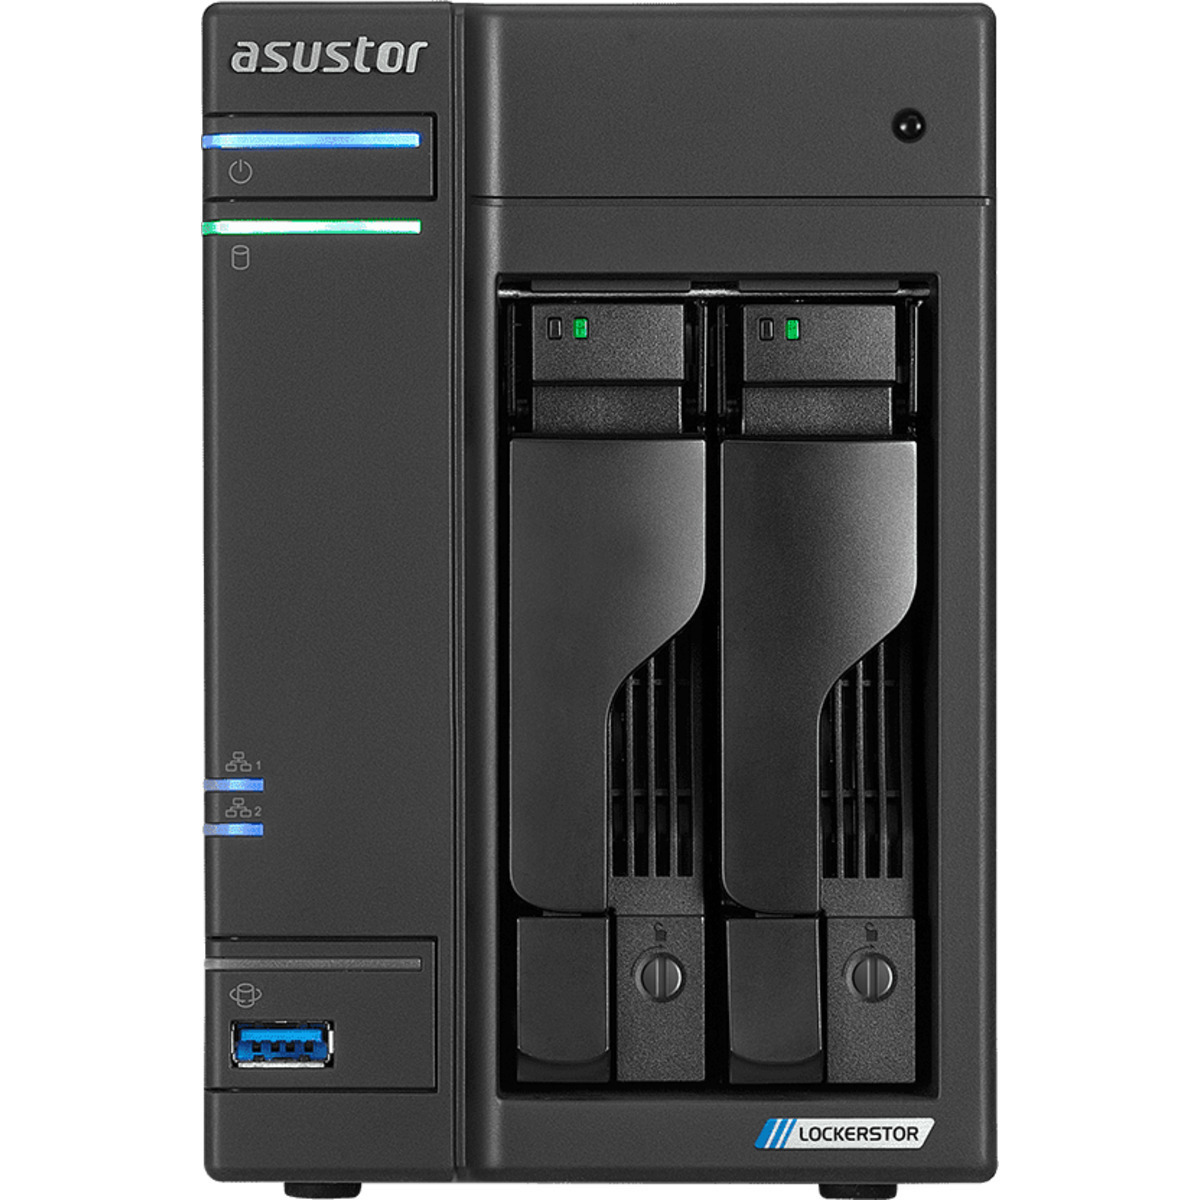 buy $1324 ASUSTOR AS6602T Lockerstor 2 32tb Desktop NAS - Network Attached Storage Device 2x16000gb Western Digital Ultrastar DC HC550 WUH721816ALE6L4 3.5 7200rpm SATA 6Gb/s HDD ENTERPRISE Class Drives Installed - Burn-In Tested - FREE RAM UPGRADE - nas headquarters buy network attached storage server device das new raid-5 free shipping usa christmas new year holiday sale AS6602T Lockerstor 2